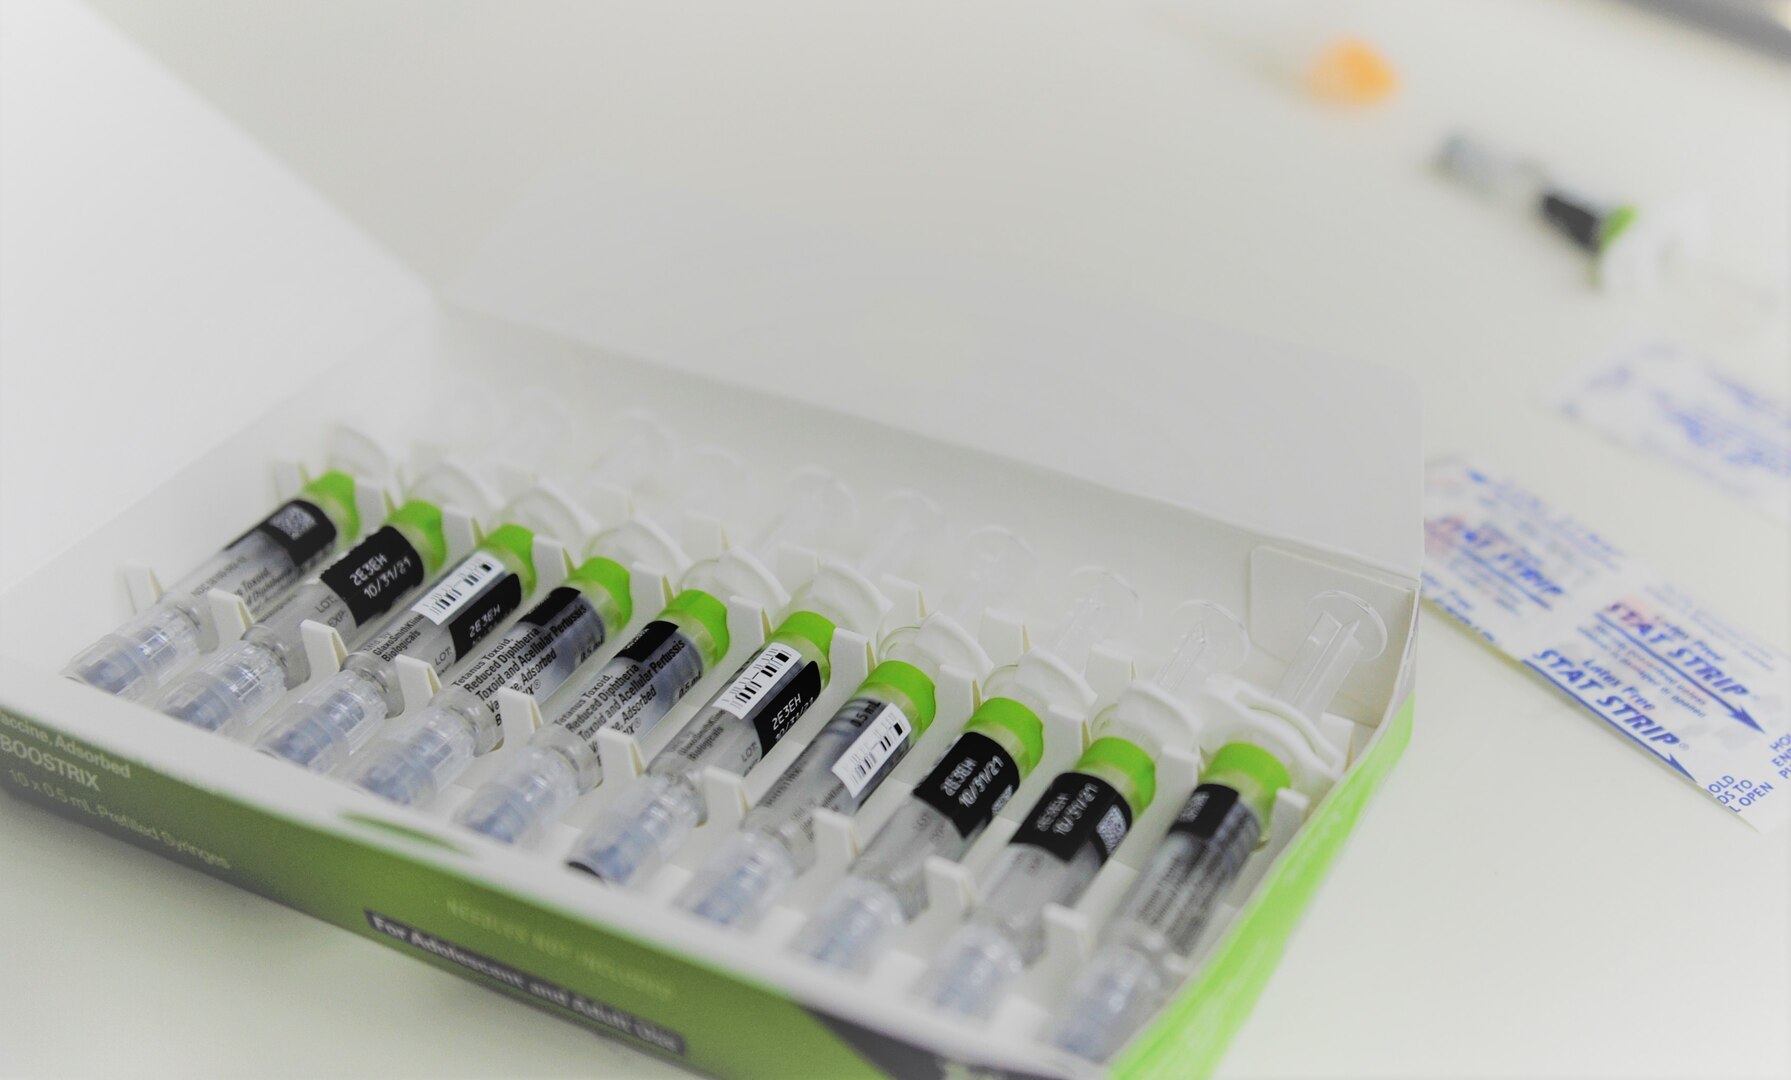 A box of vaccines sits on a table inside the immunizations clinic at Joint Base San Antonio-Randolph, Texas, Sept. 25, 2019. With flu season quickly approaching, health care professionals throughout JBSA are awaiting the arrival of this year’s influenza vaccine supplies and encouraging beneficiaries to receive their flu shots once the vaccines are available. The flu is spread throughout the year, but is most common during the fall and winter months. Influenza activity typically begins to increase in October and November, peaking during the winter months and continuing as late as May.